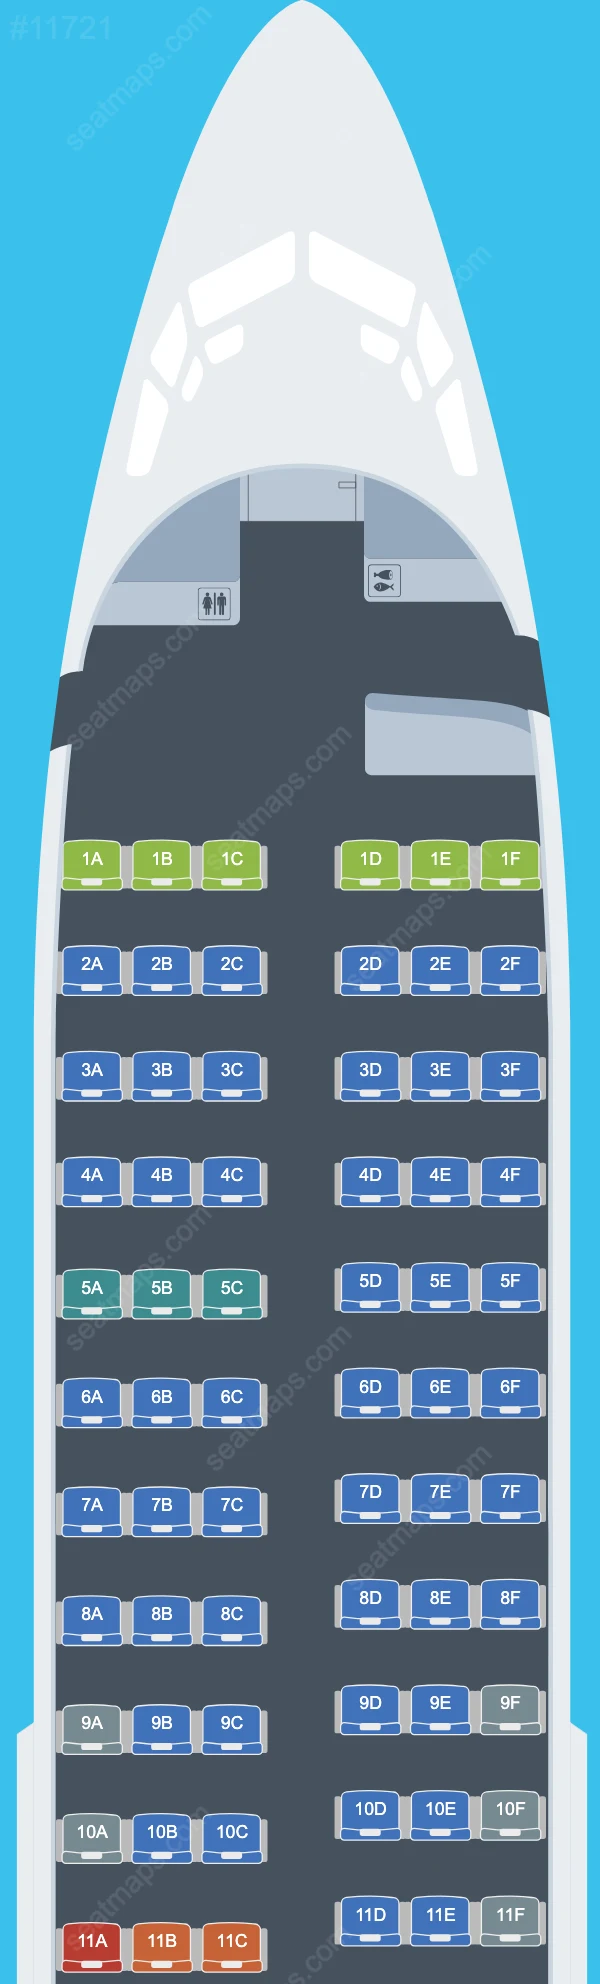 SkyUp MT Boeing 737 aircraft seat map  737-700